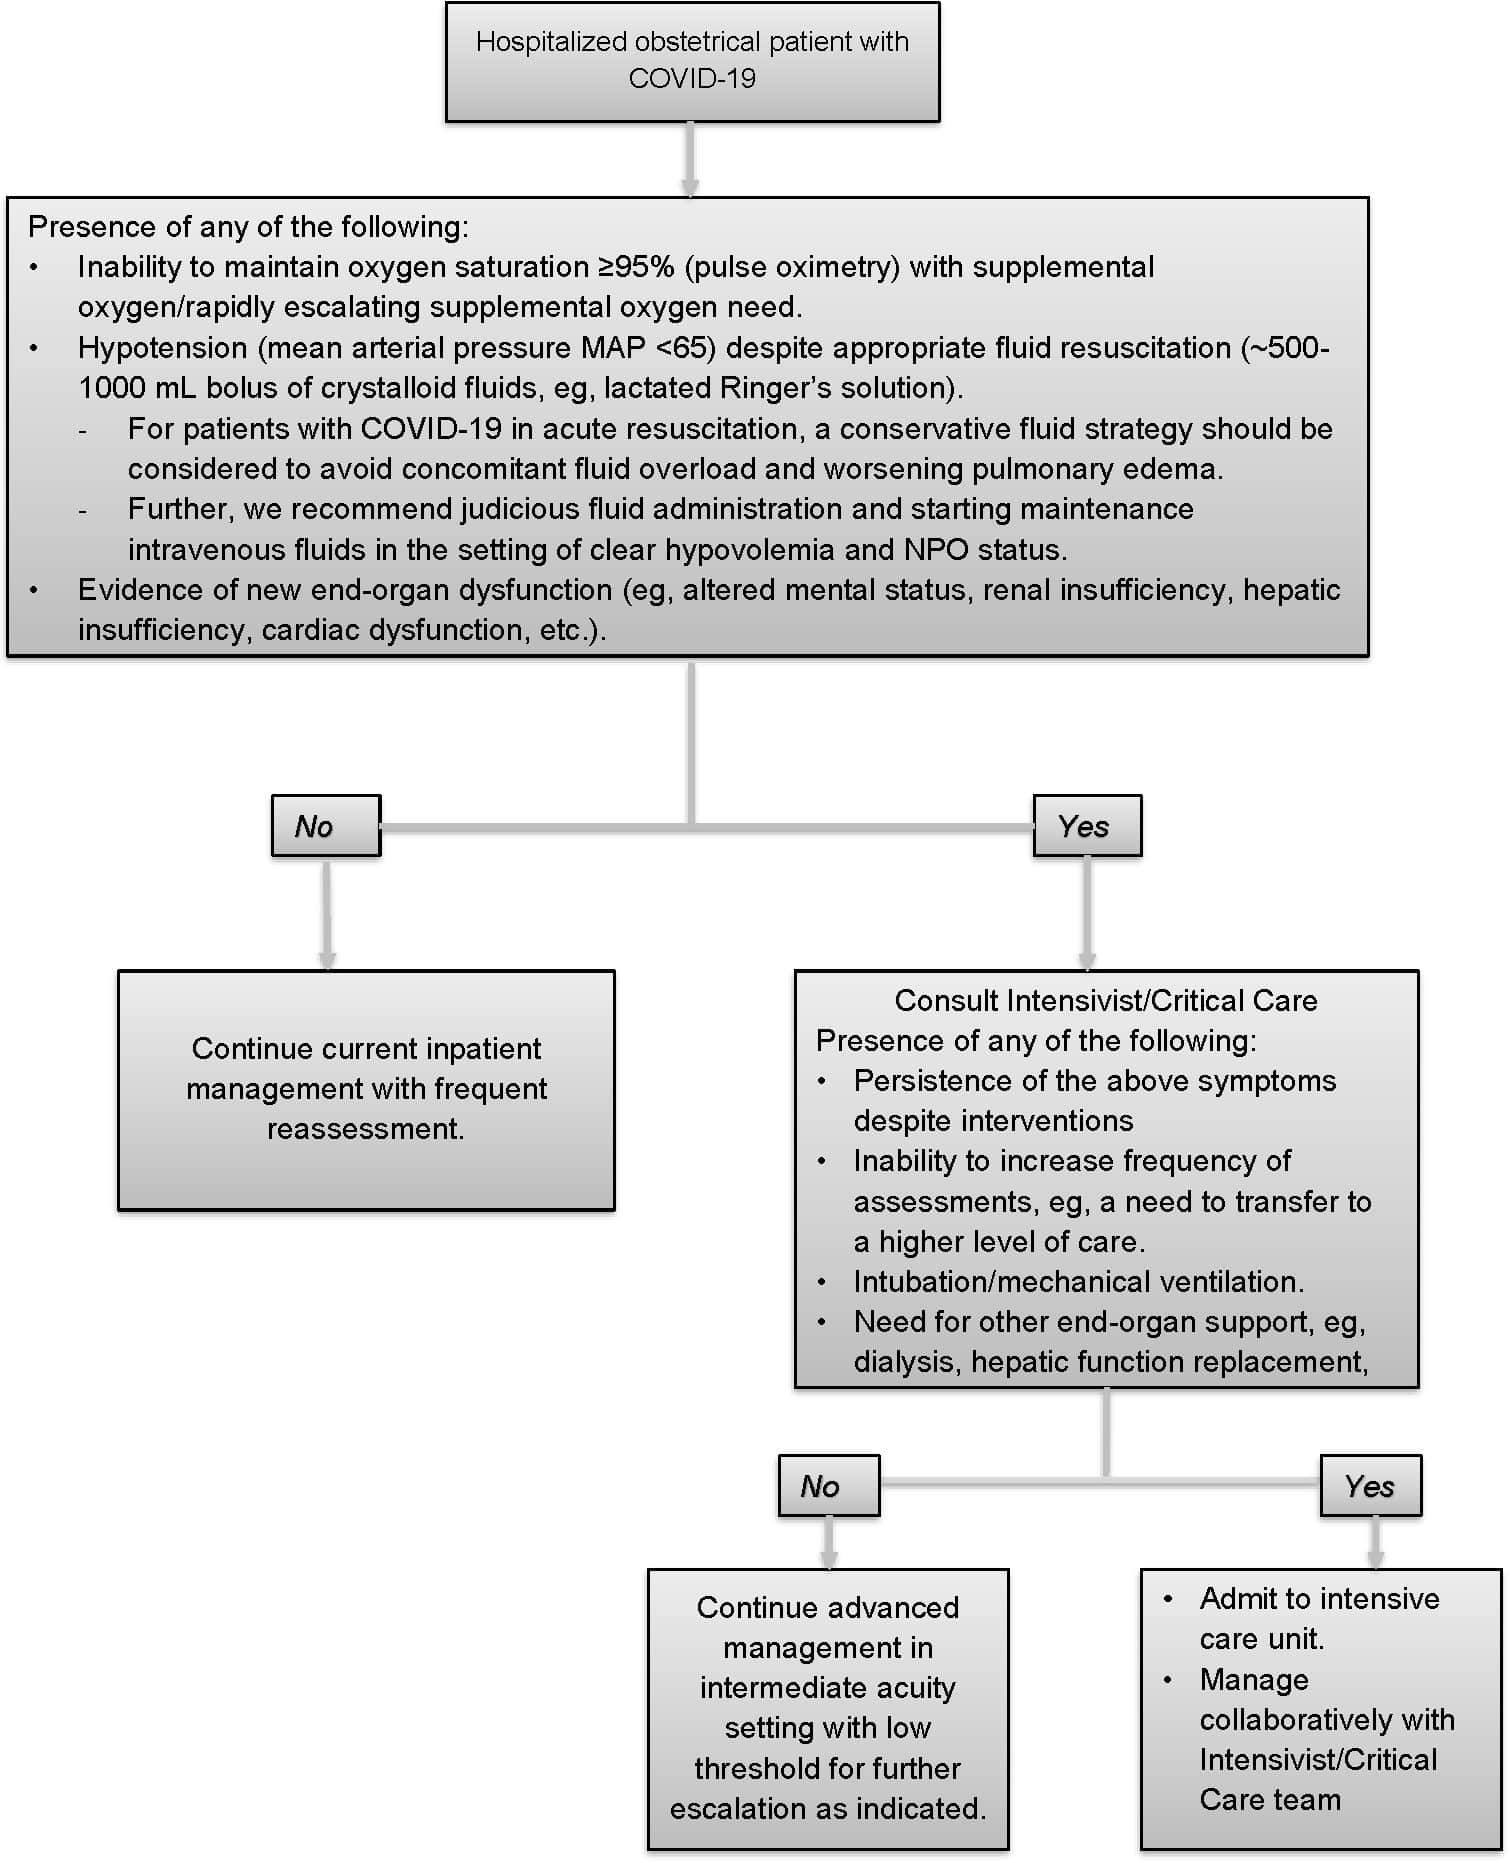 Algorithm for Intensive Care Unit Admission for Hospitalized Obstetrical Patients with COVID-19